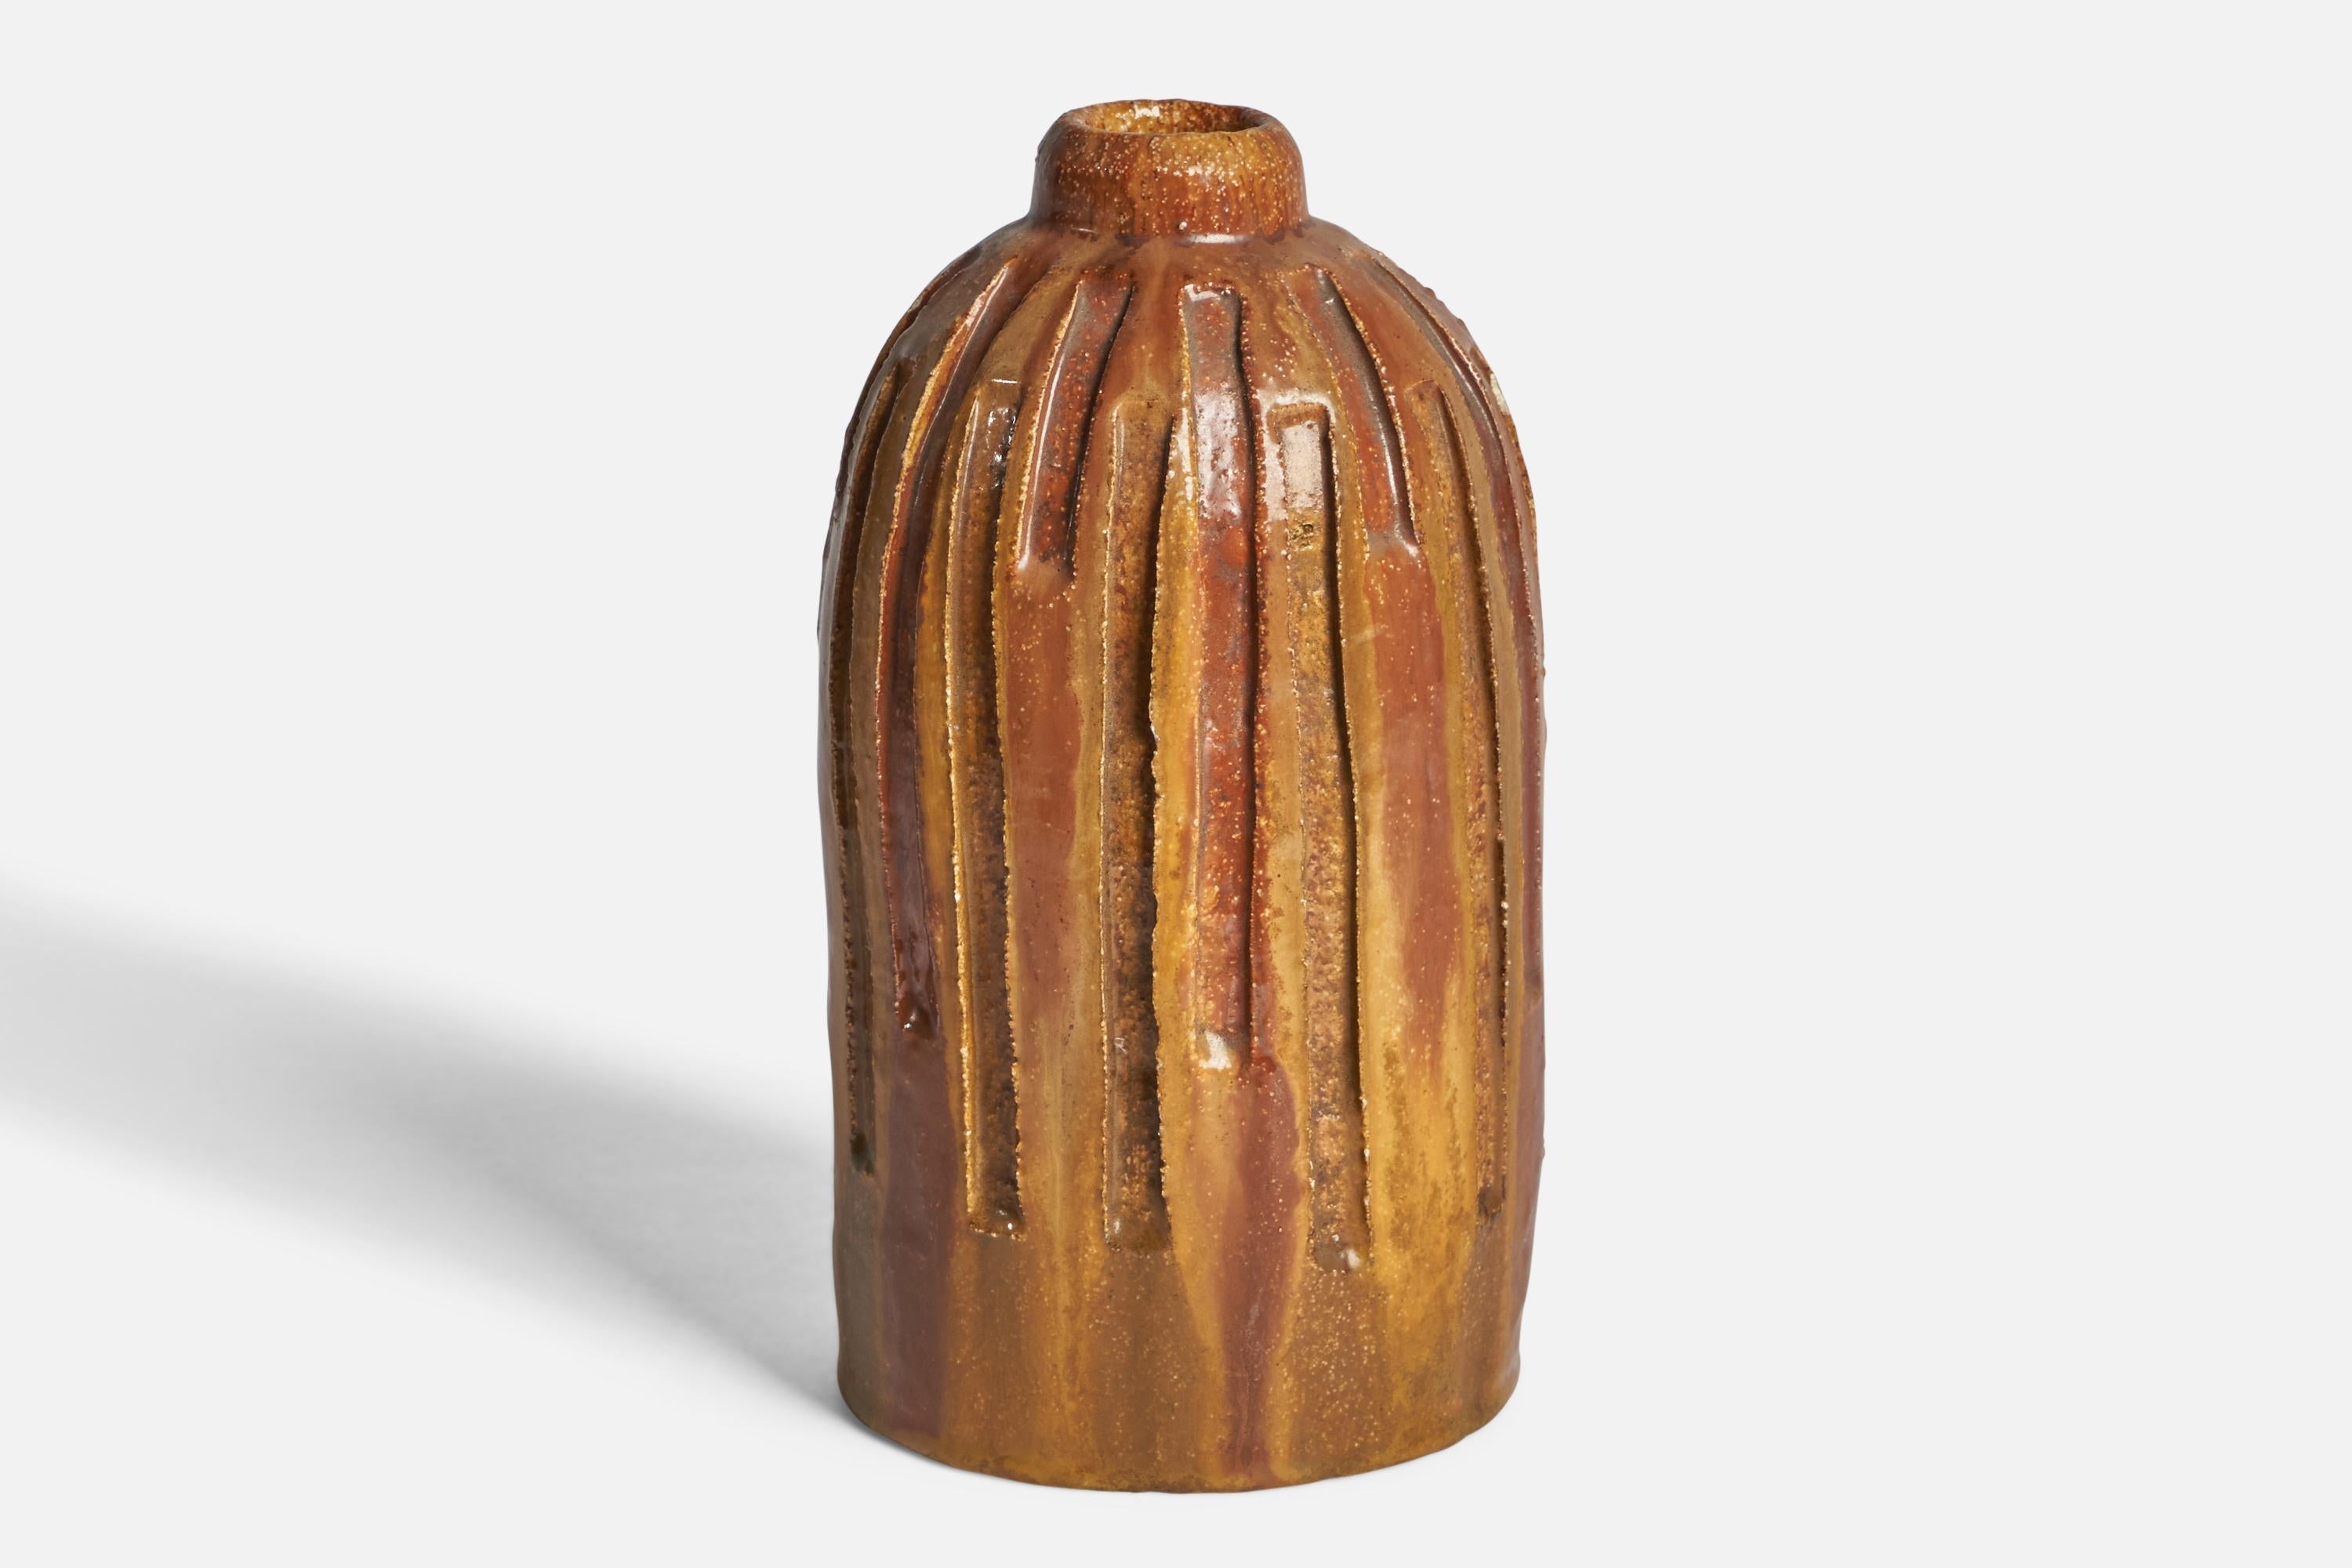 A brown yellow-glazed ceramic vase designed and produced in the US, 1960s.